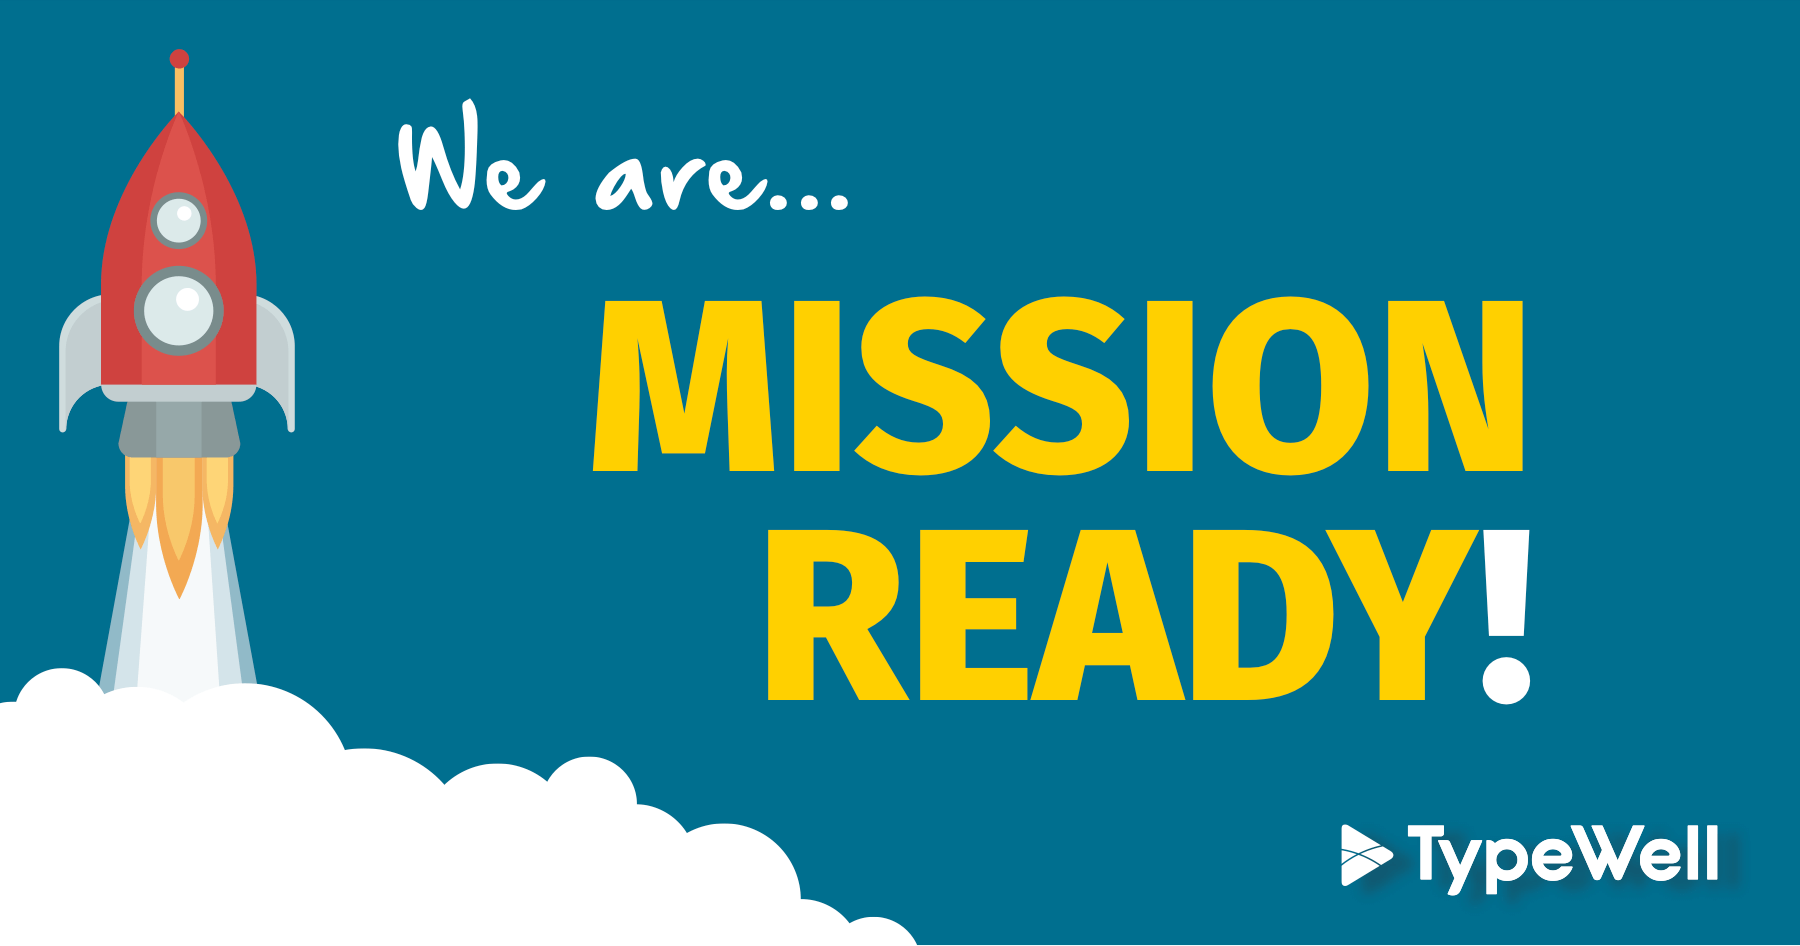 Blue background with rocket launching and text that says: We are Mission Ready!"